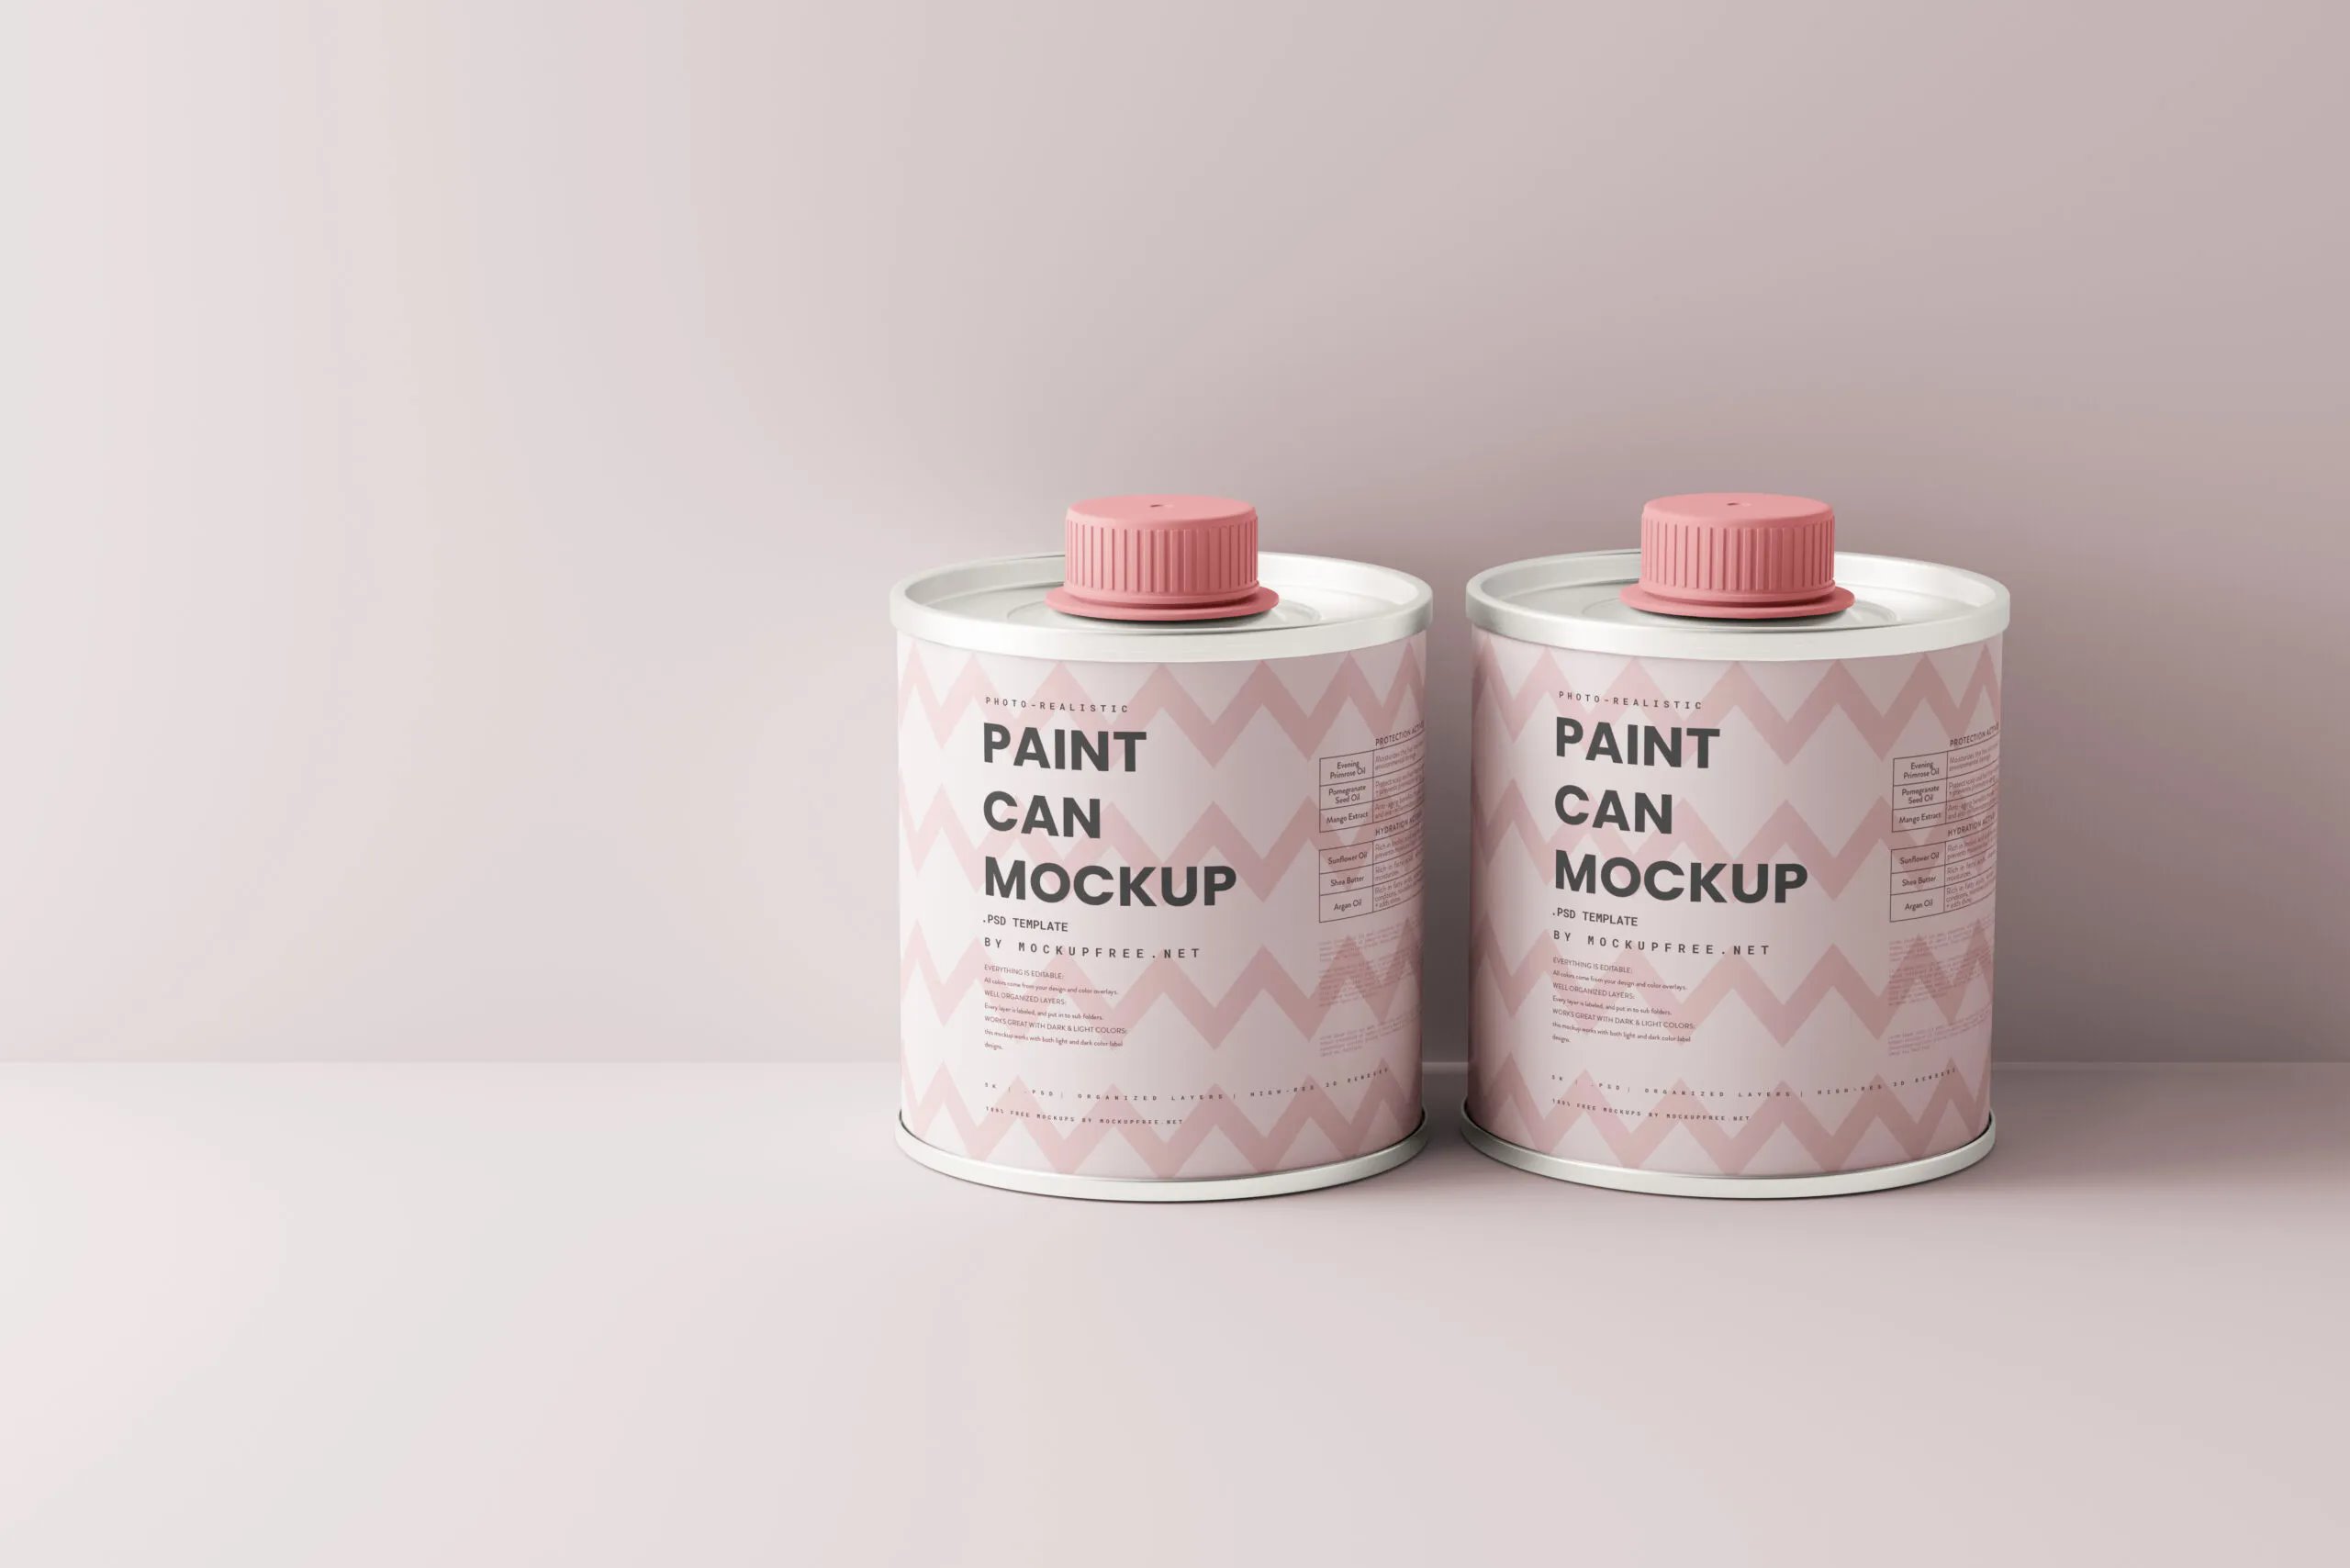 10 Paint Can Mockups in Different Visions FREE PSD